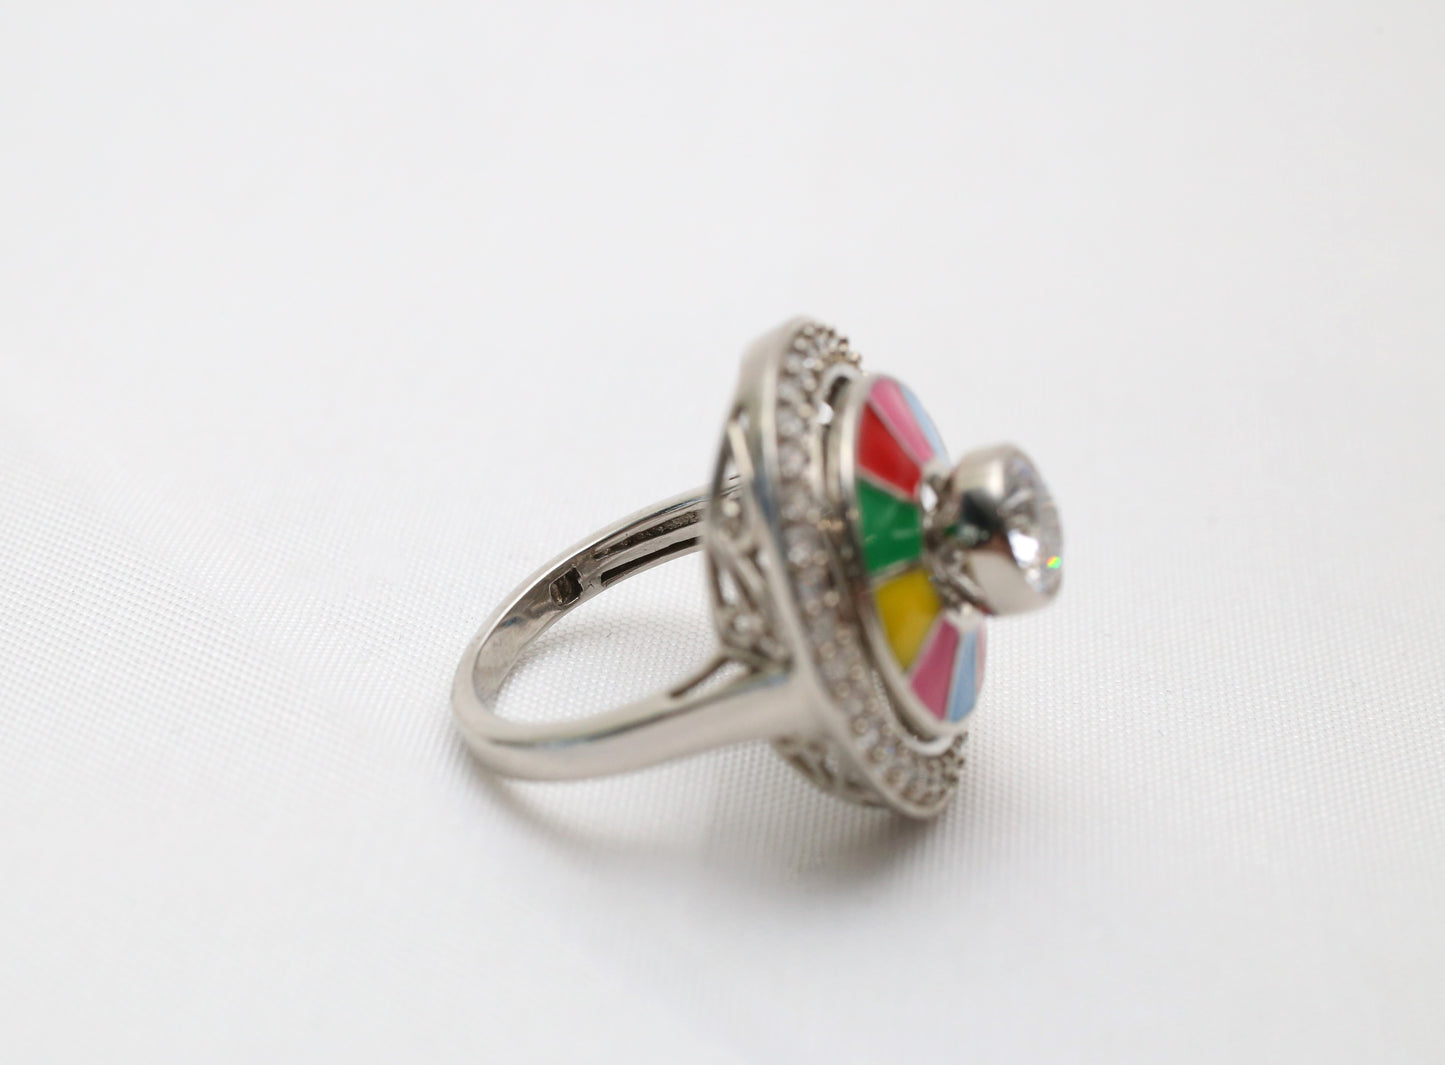 D'Joy Sterling Silver CZ Spinning Color Wheel Ring, Size 8.25 - 10.0g